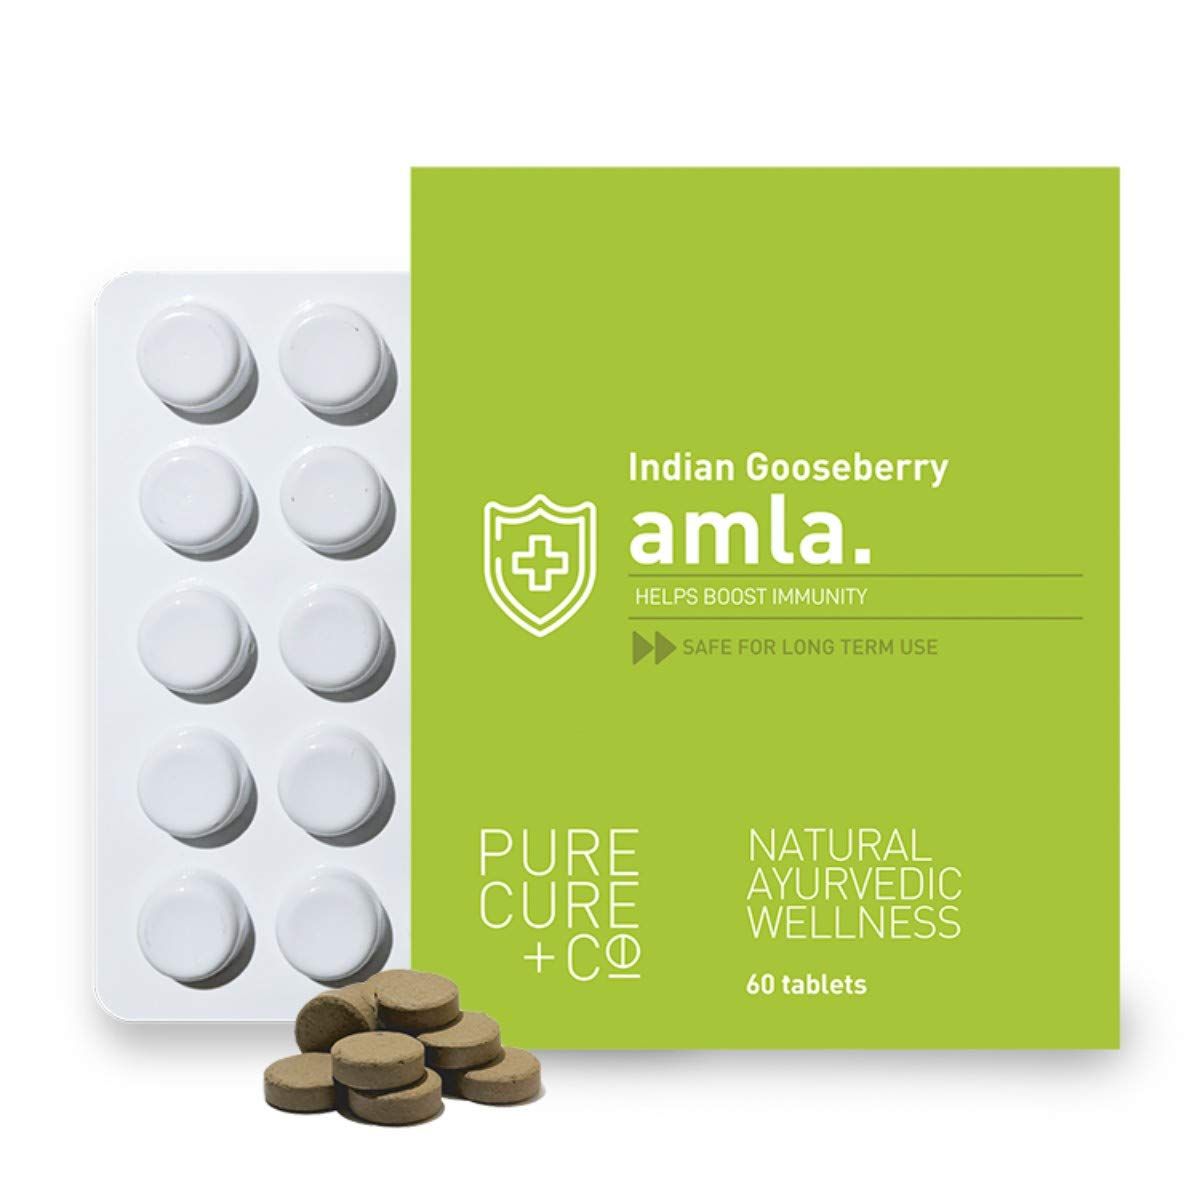 Pure Cure +Co Indian Gooseberry Amla Tablets Image